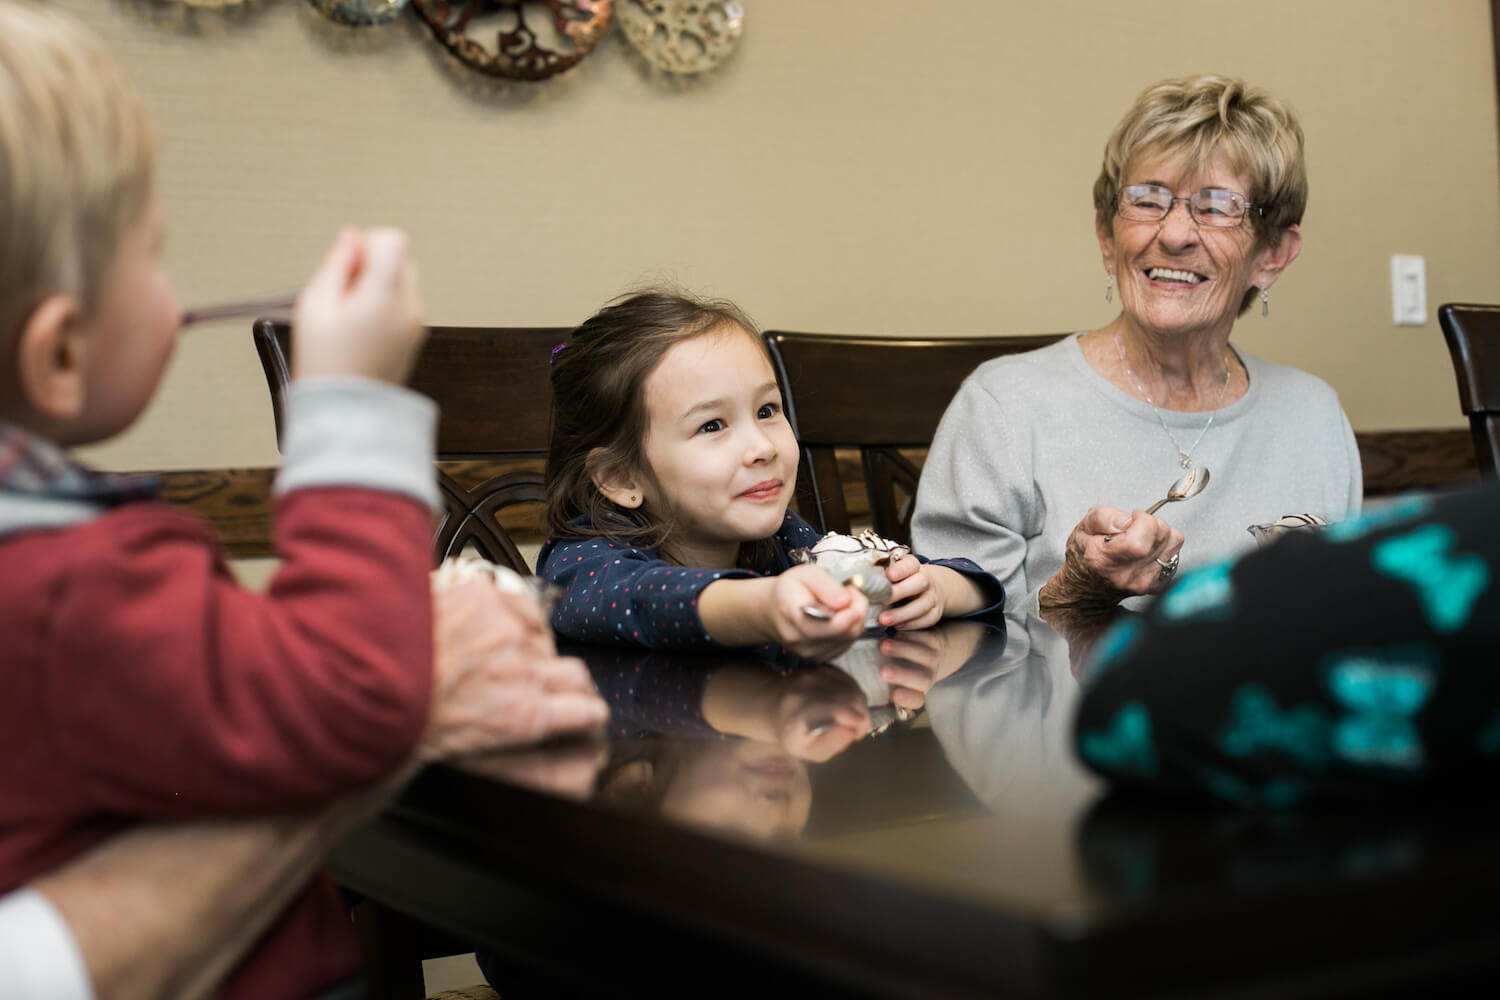 A senior woman eating ice cream at a table with her grandchildren